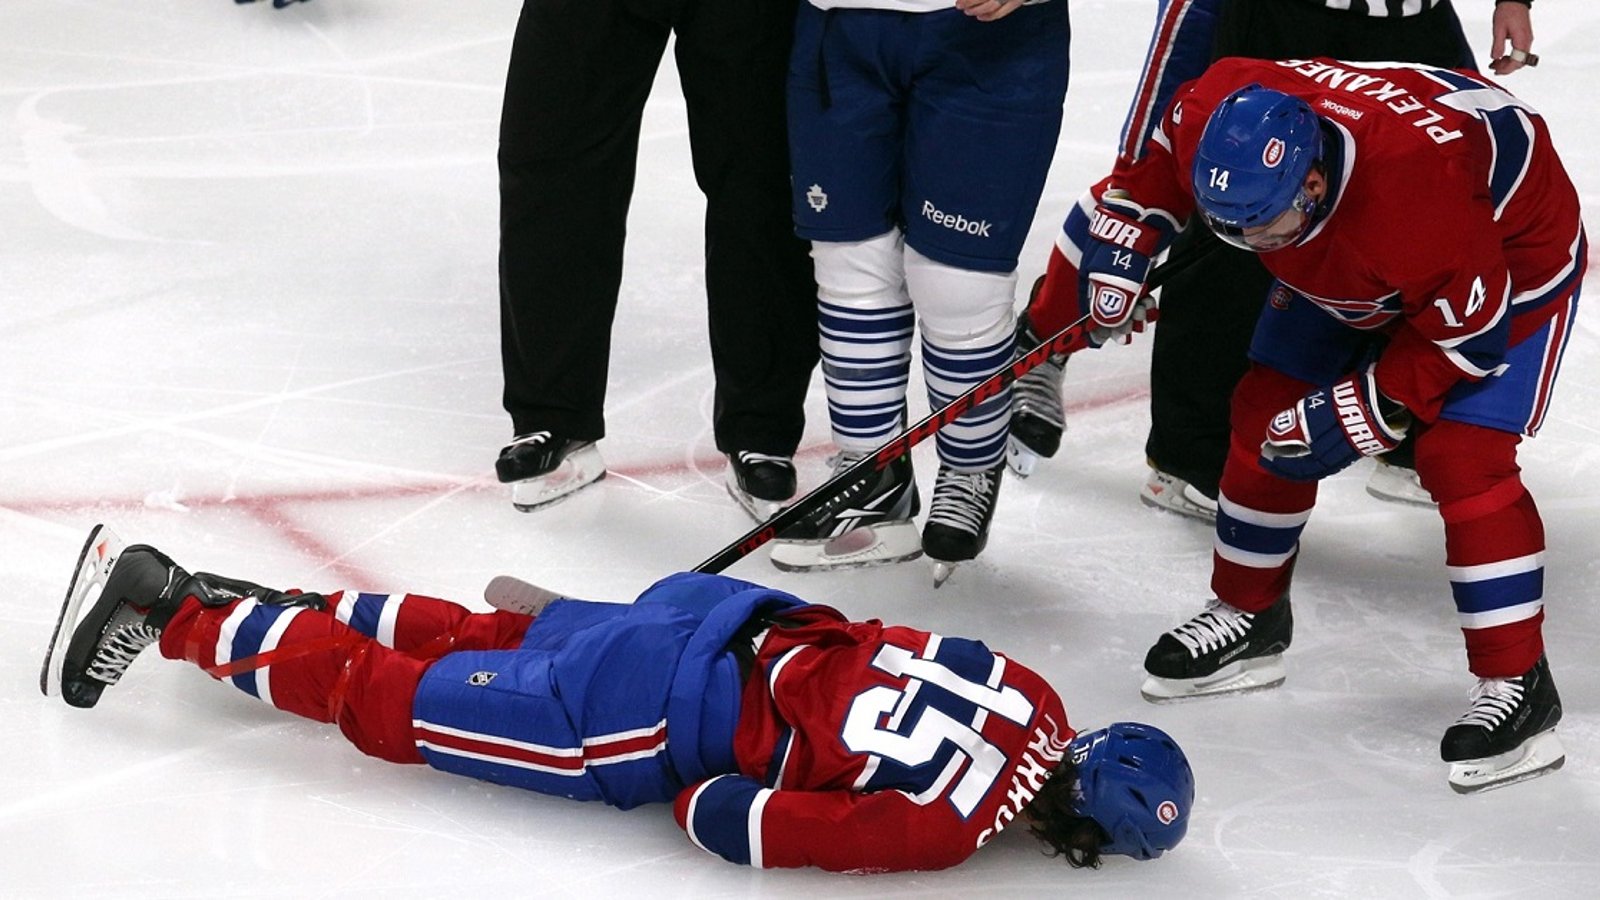 The NHL's new concussion rules won't go over well with some fans.